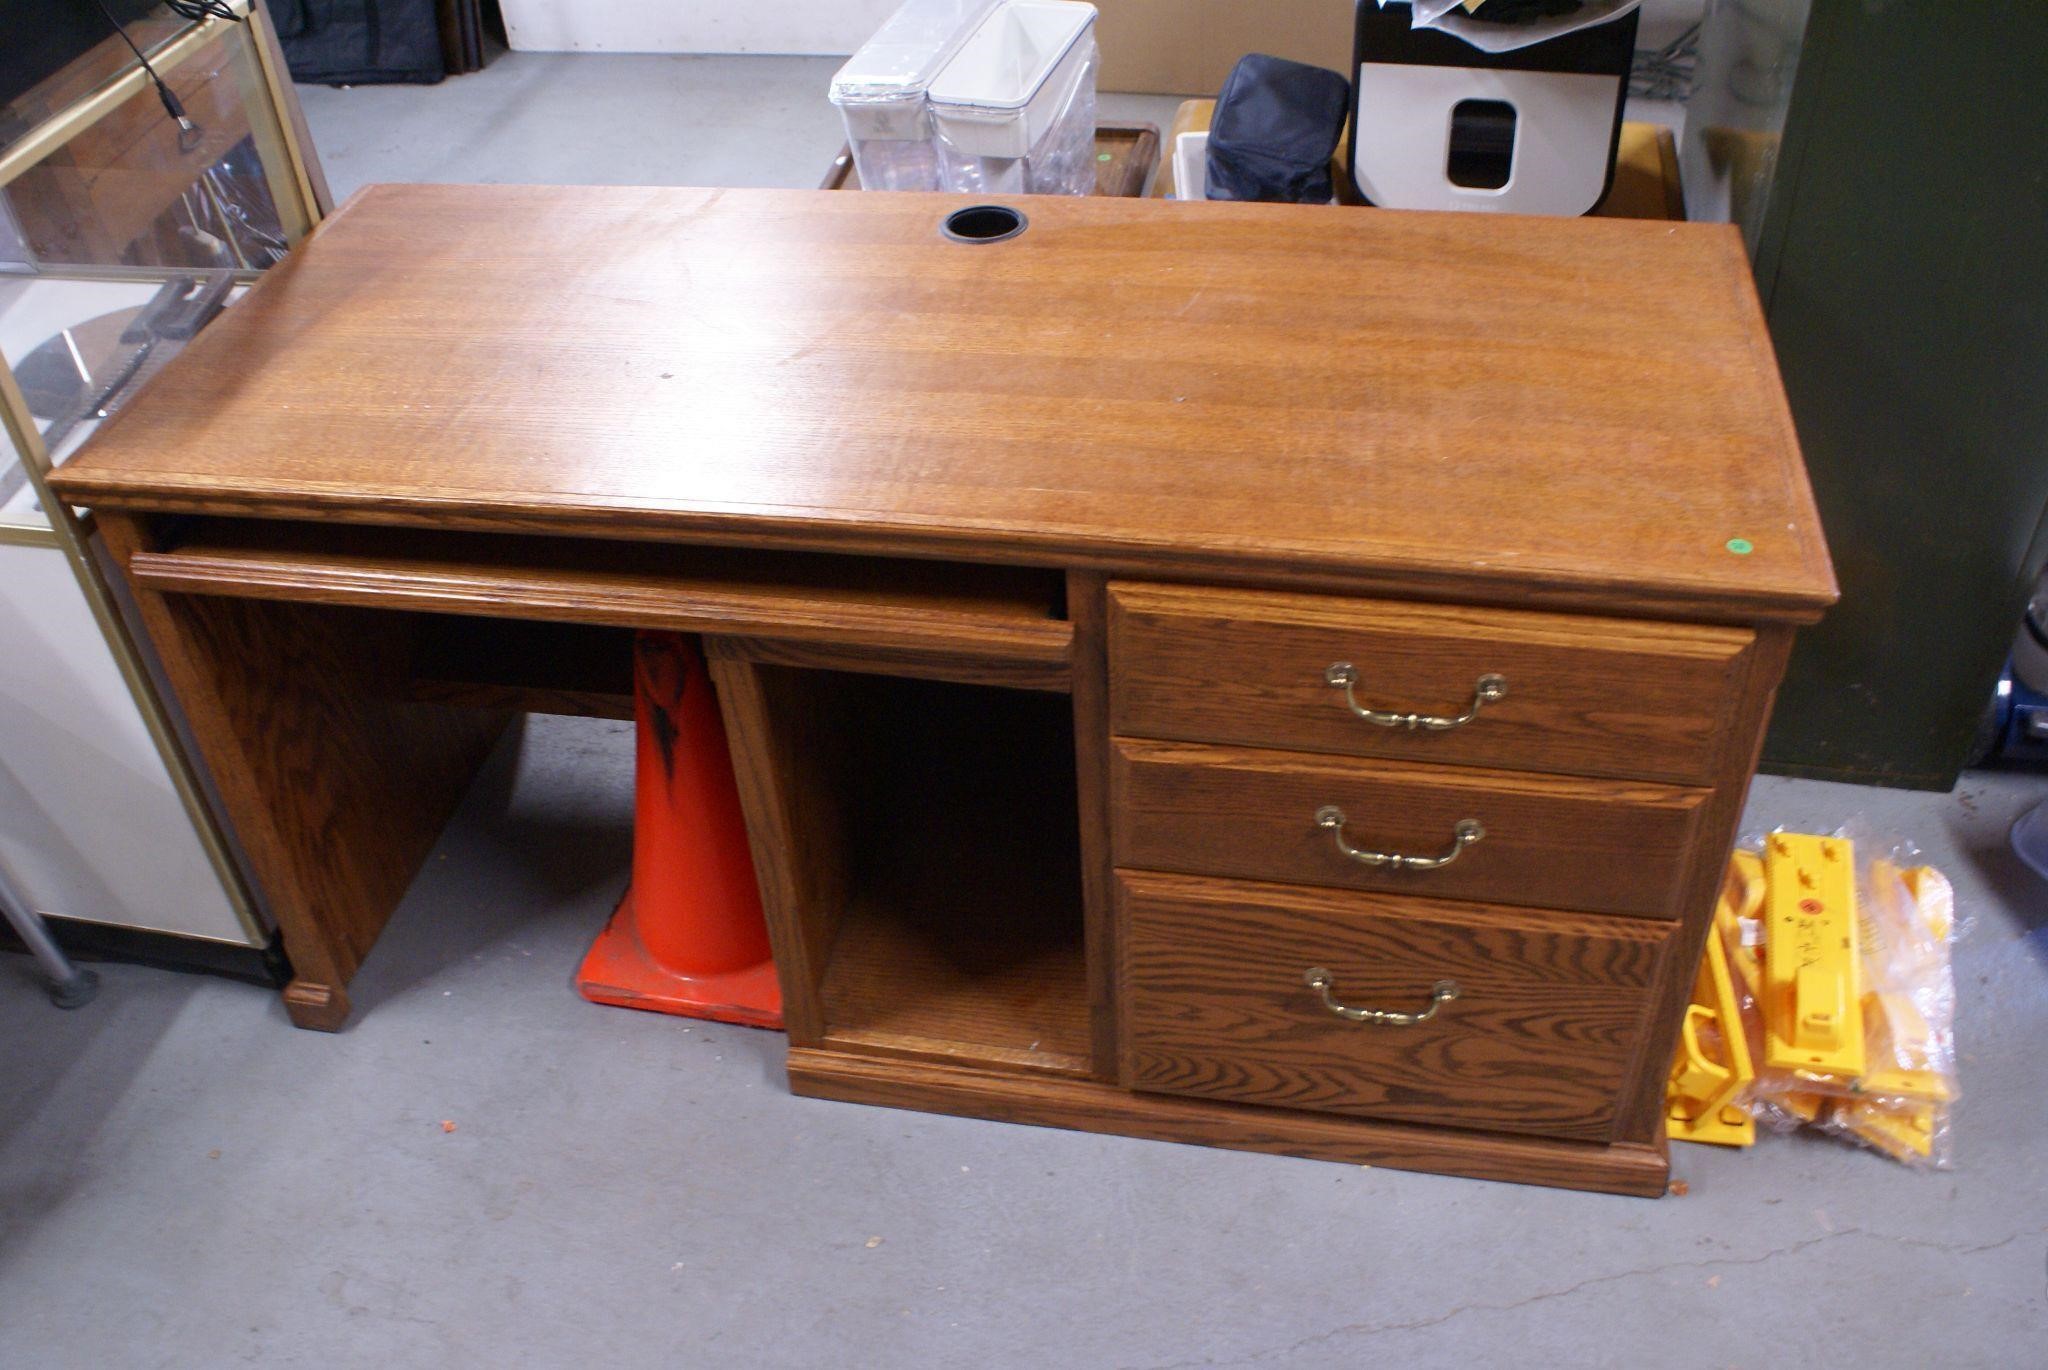 Wood Office Desk with Drawers